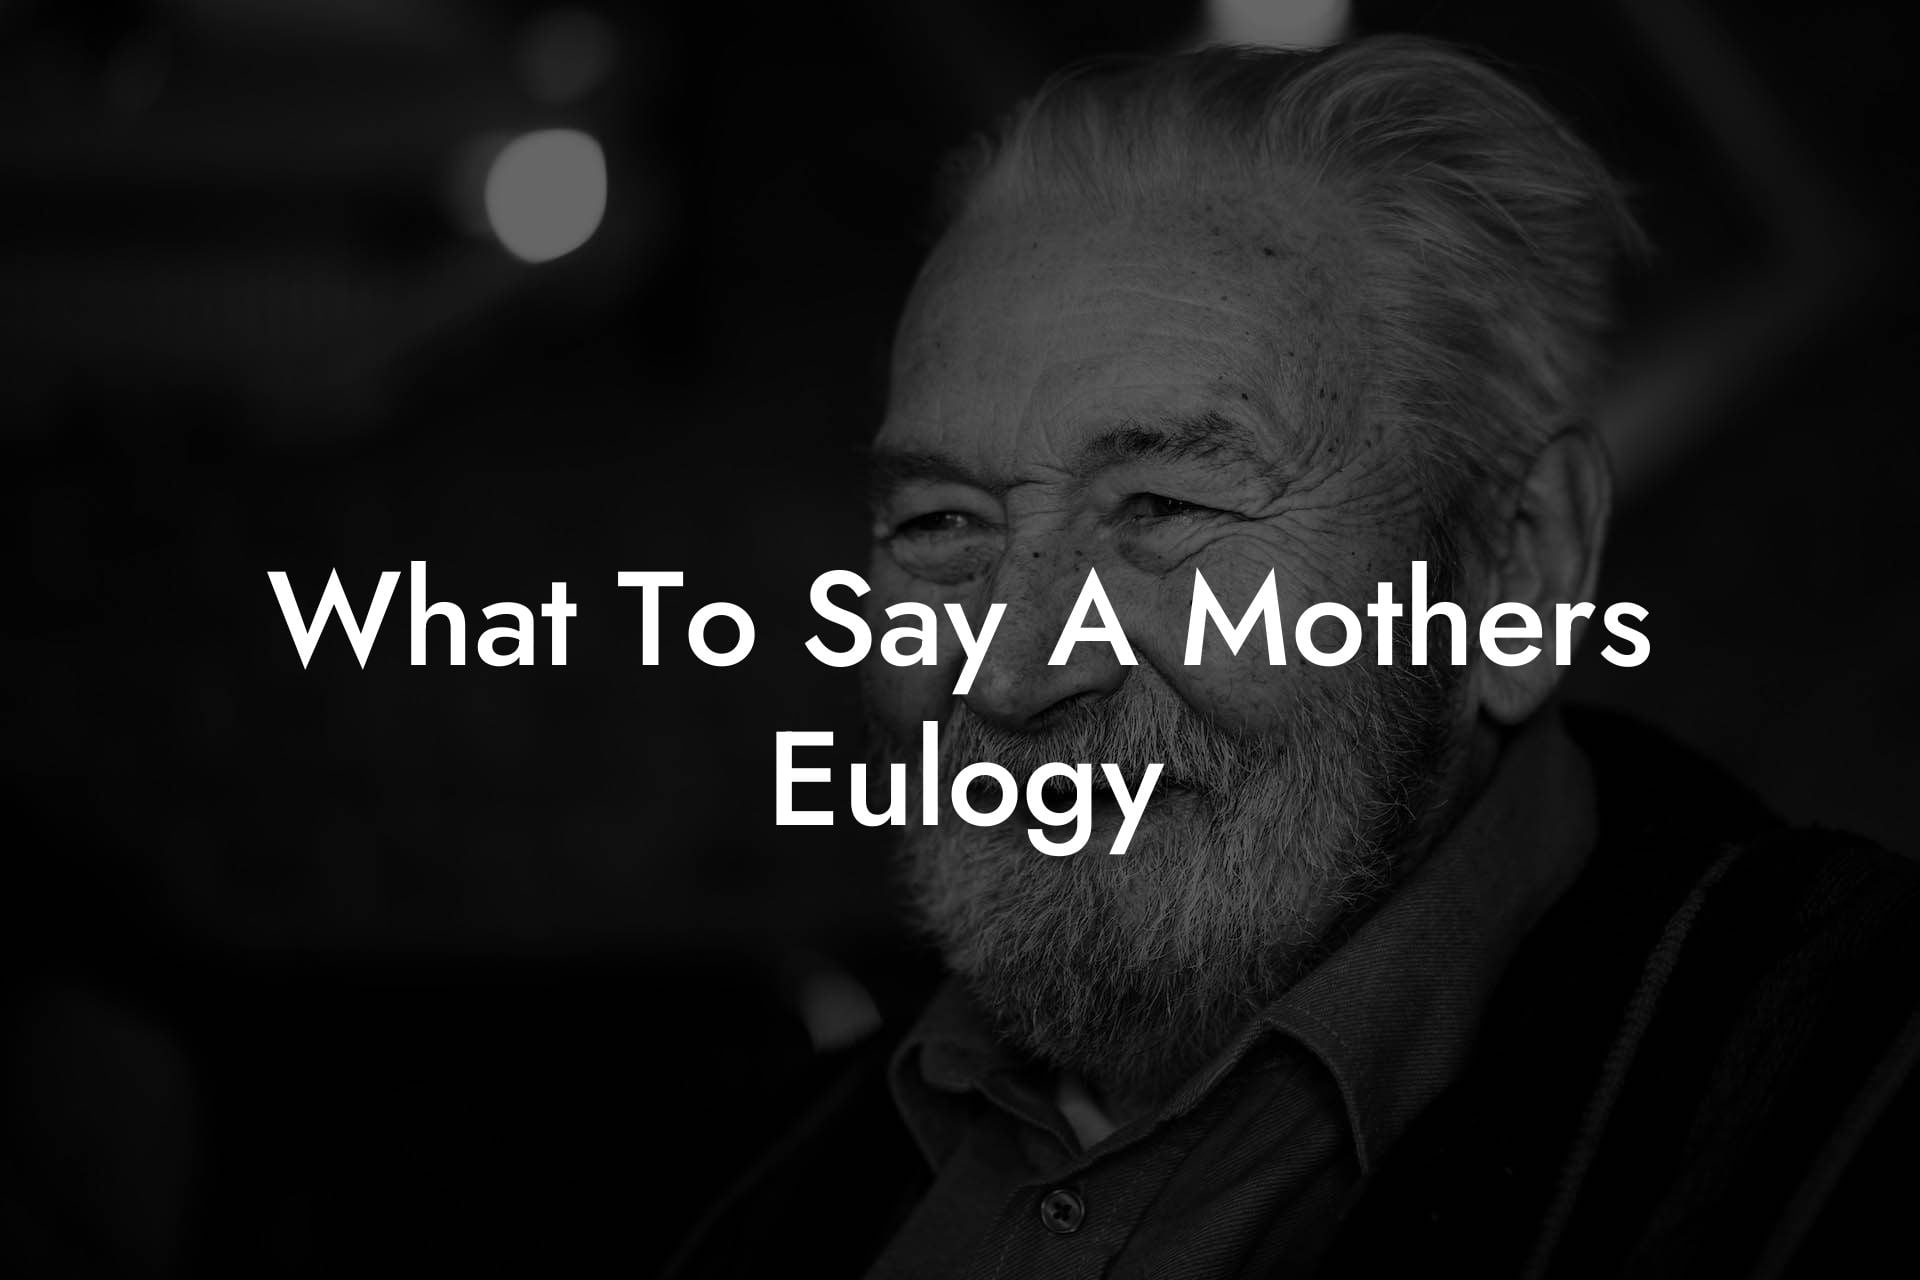 What To Say A Mothers Eulogy